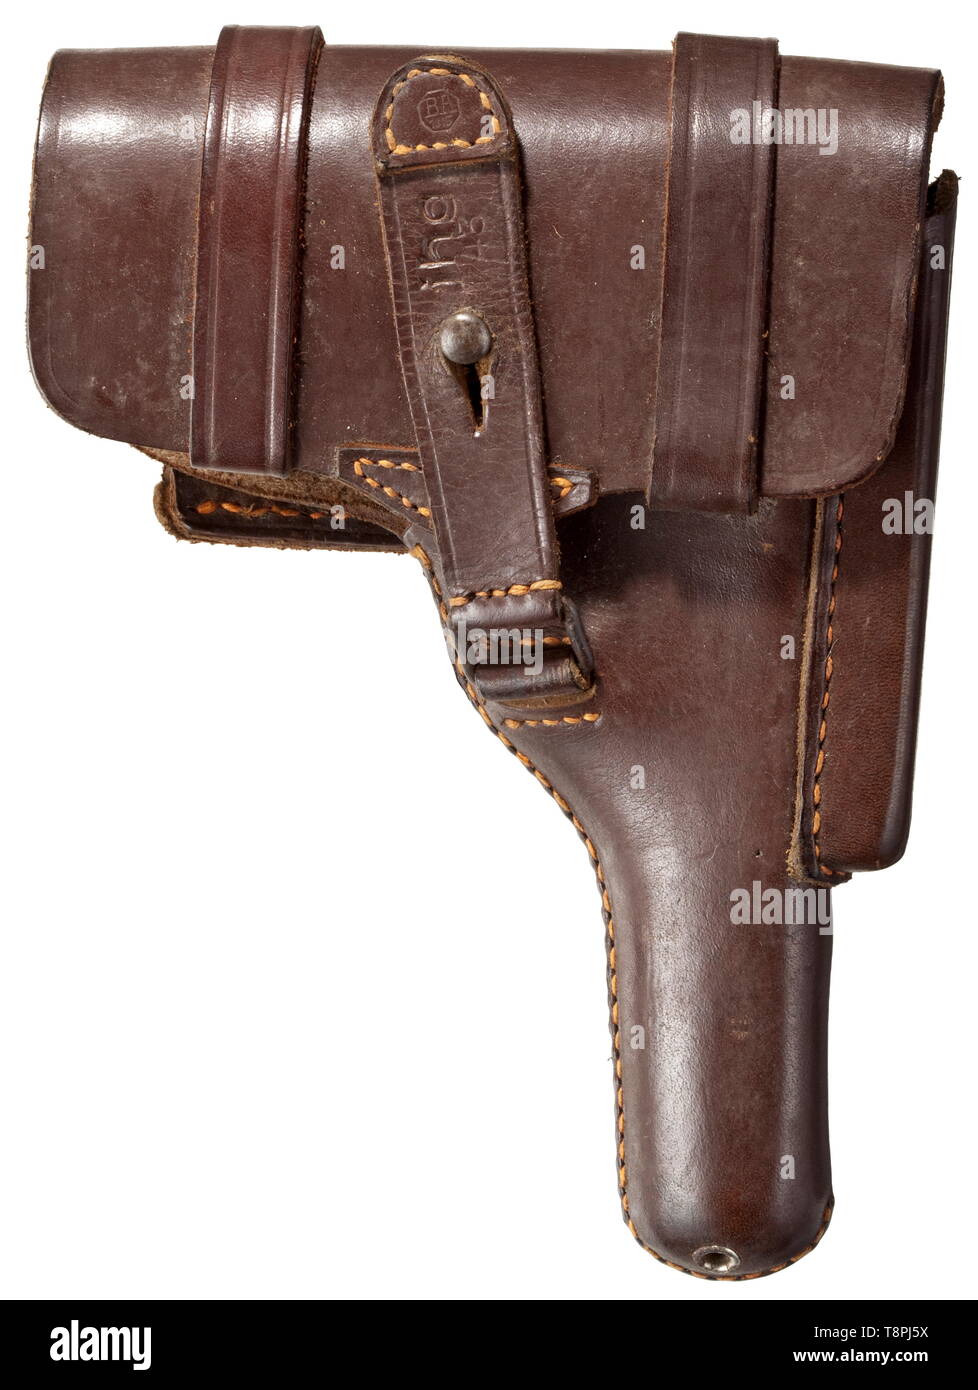 A holster for the FN Mod. 10/22 the closure strap encoded 'jhg 43' for manufacturer Gustav Genschow, Werk Alstadt-Hachenburg Dark-brown leather, cut in Theuermann style, inside cover with ink stamping 'Nur für lange Browning Pistole Kal. 7,65'. Lateral magazine pocket. All red stitching in order. In mint condition. historic, historical, Air Force, branch of service, branches of service, armed service, armed services, military, militaria, air forces, object, objects, stills, clipping, clippings, cut out, cut-out, cut-outs, 20th century, Editorial-Use-Only Stock Photo